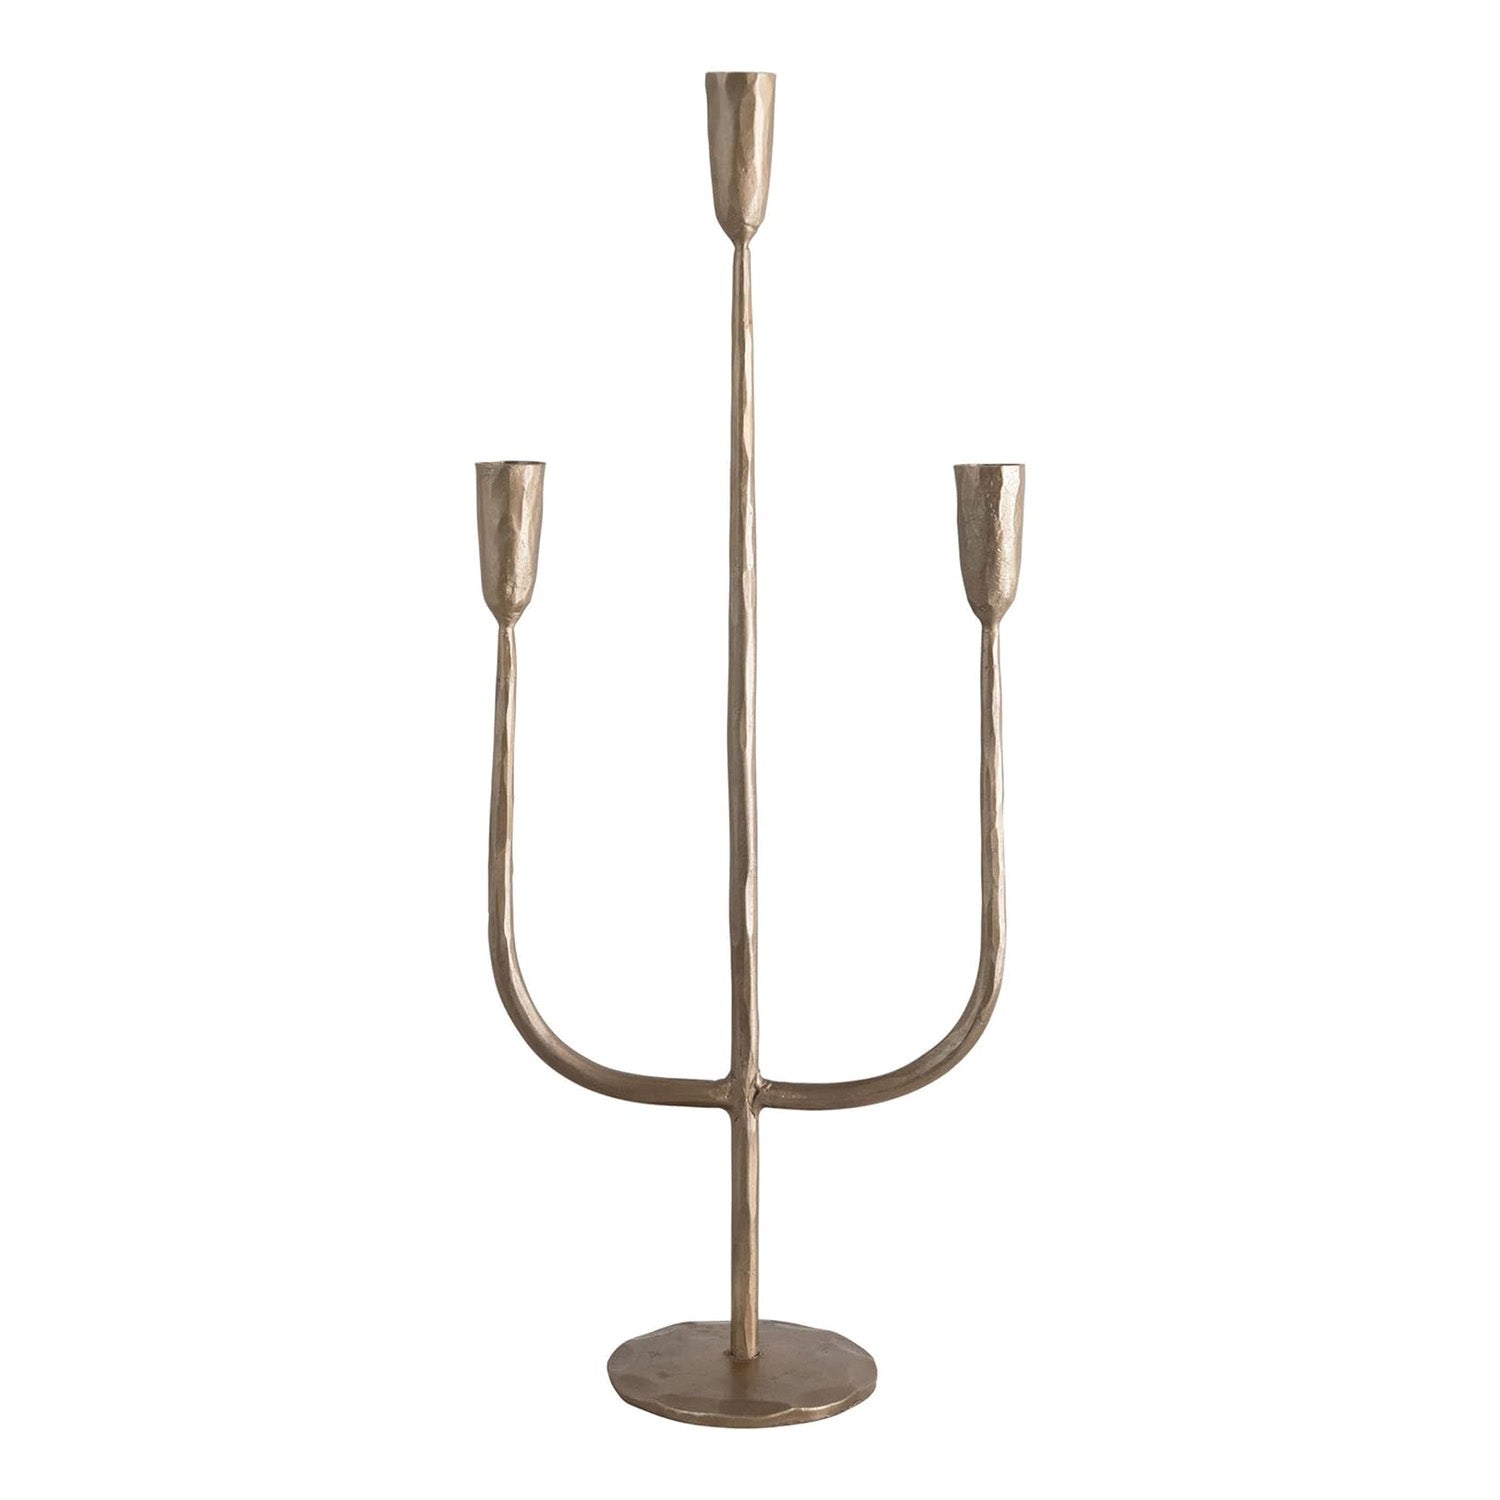 Creative Co-Op Hand-Forged Metal Candelabra, Antique Brass Finish (Holds 3 Taper Candle Holder